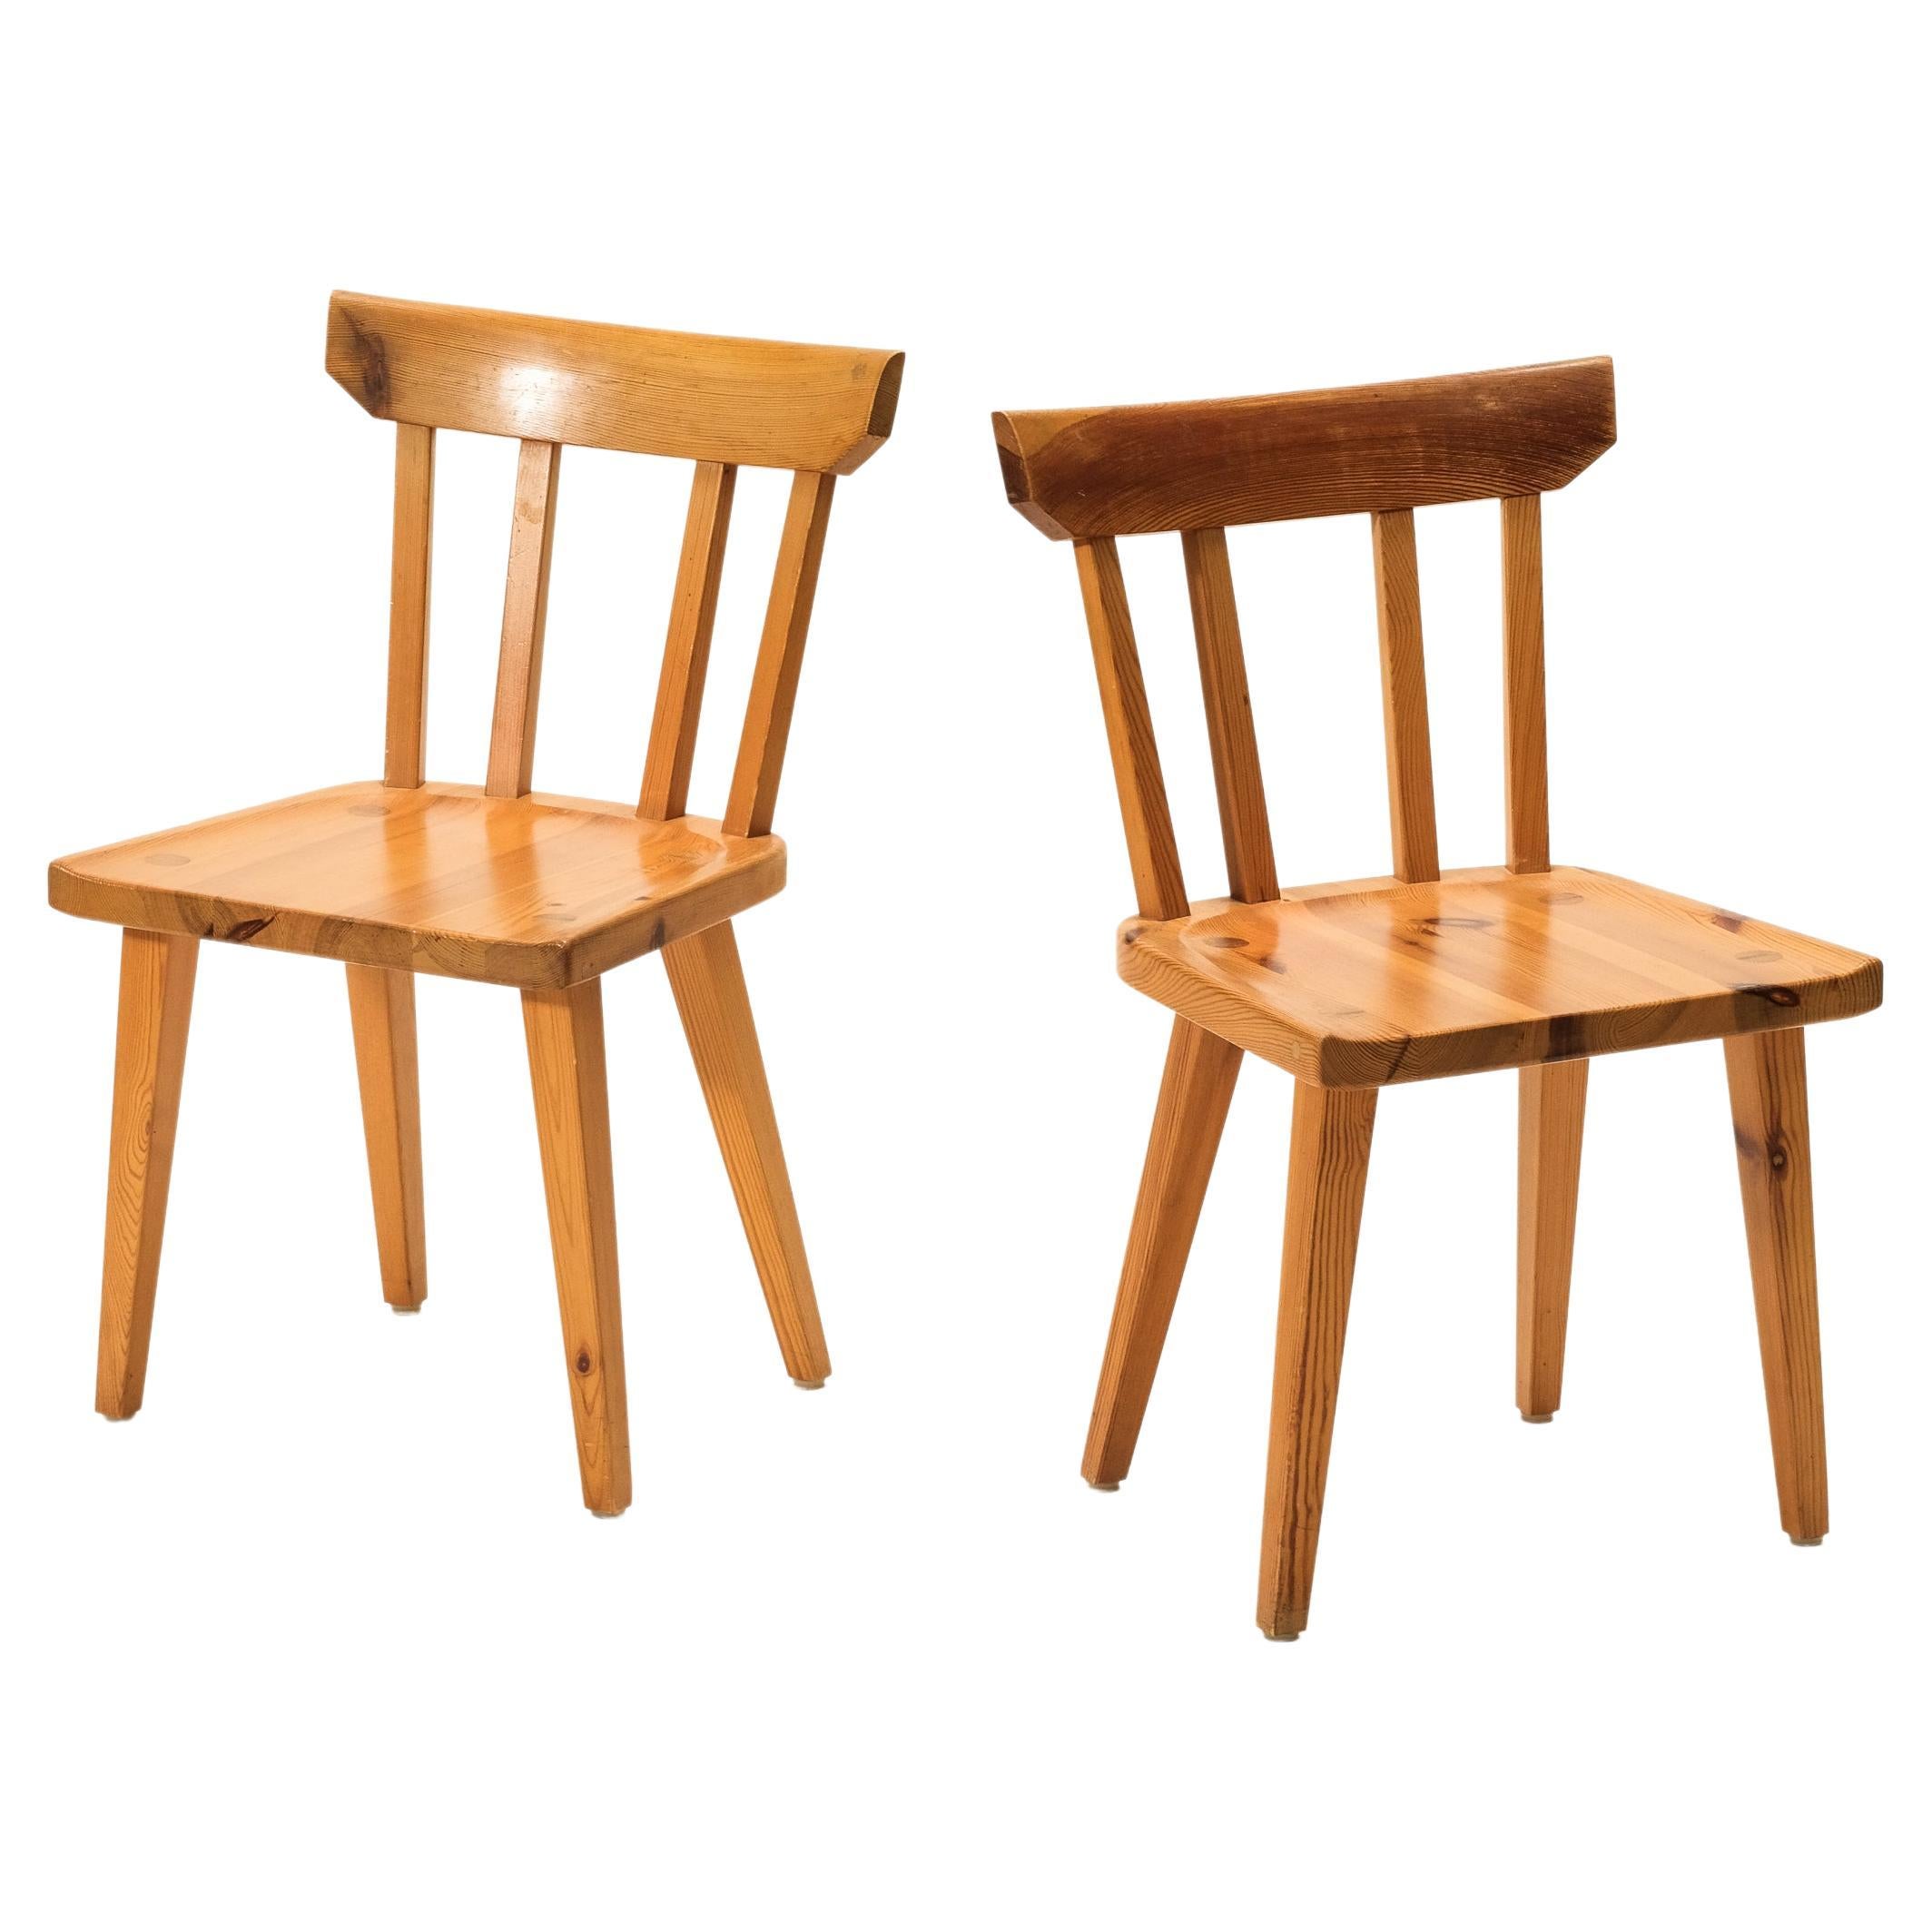 Pair of Pine Side Chairs by Göran Malmvall for Karl Andersson & Söner, 1970s